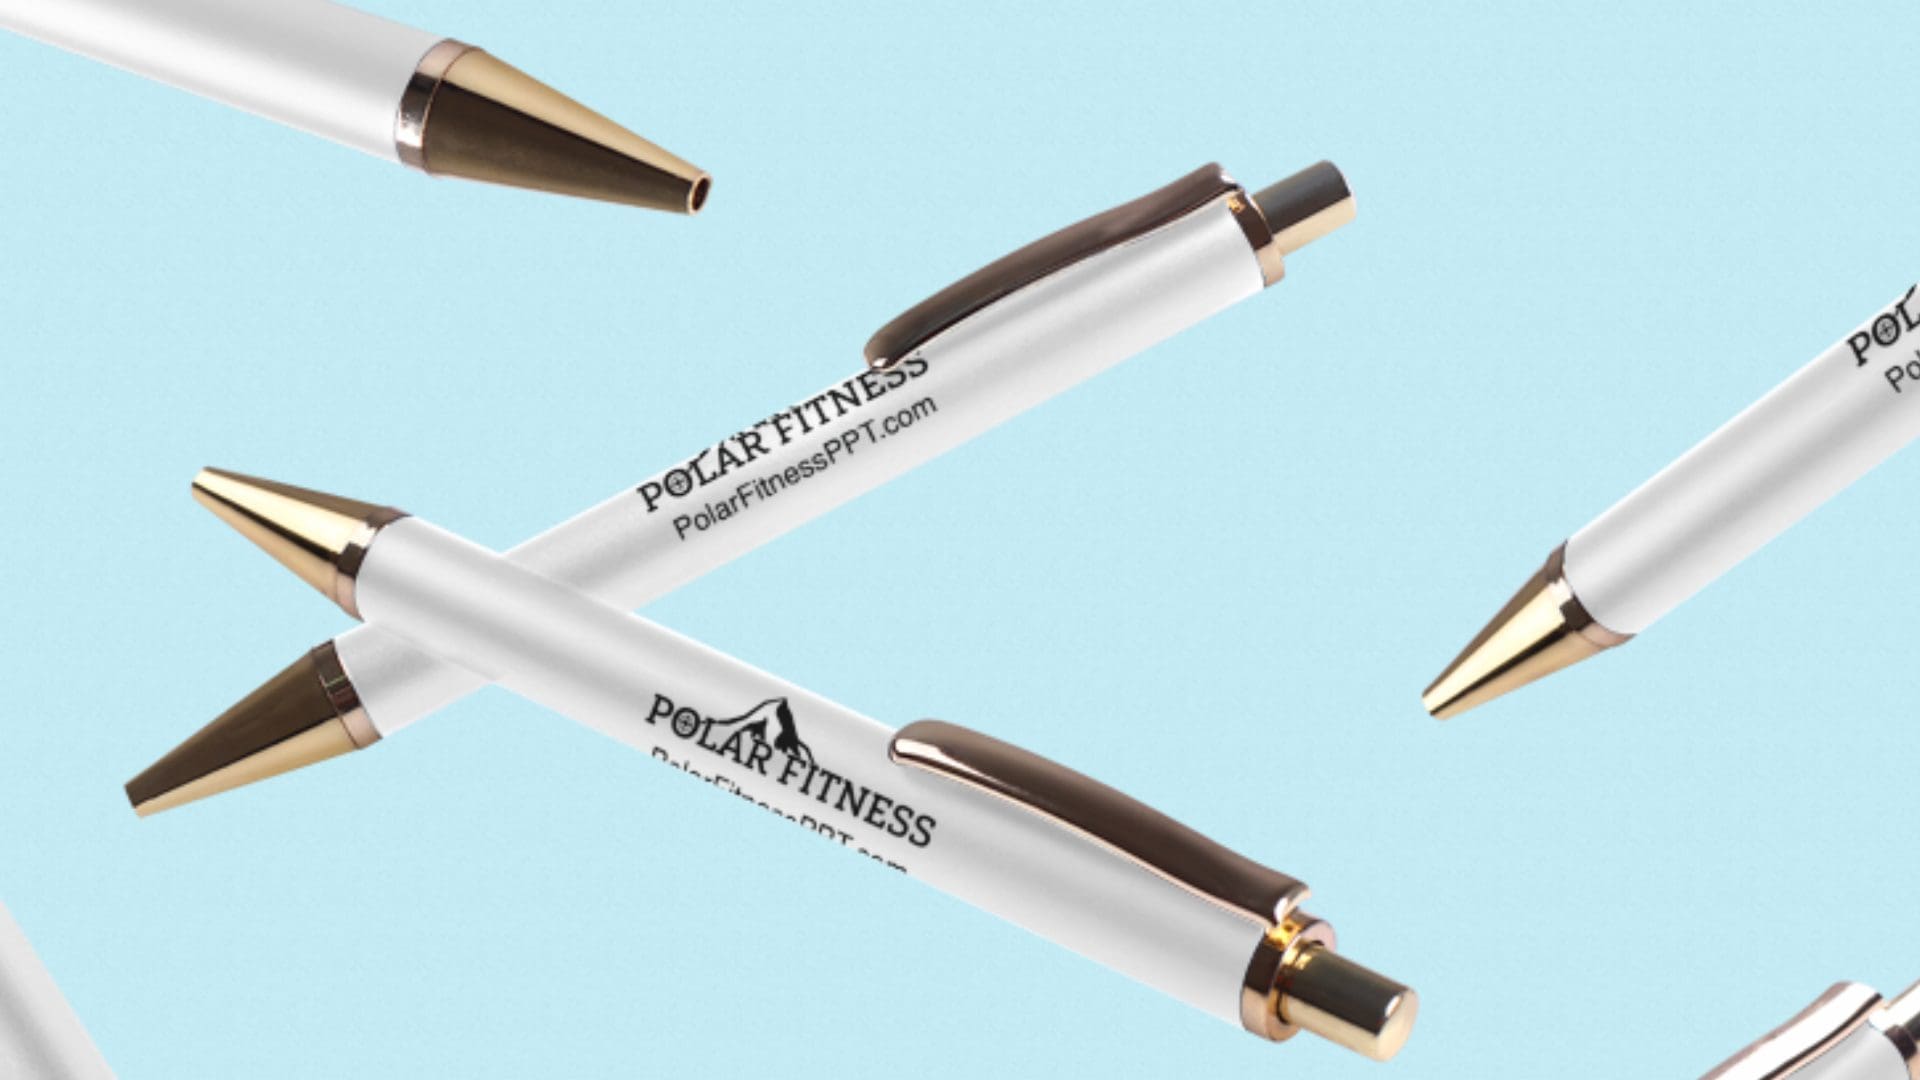 Polar Physical Therapy and Fitness - Belfast Pen Mockup 01